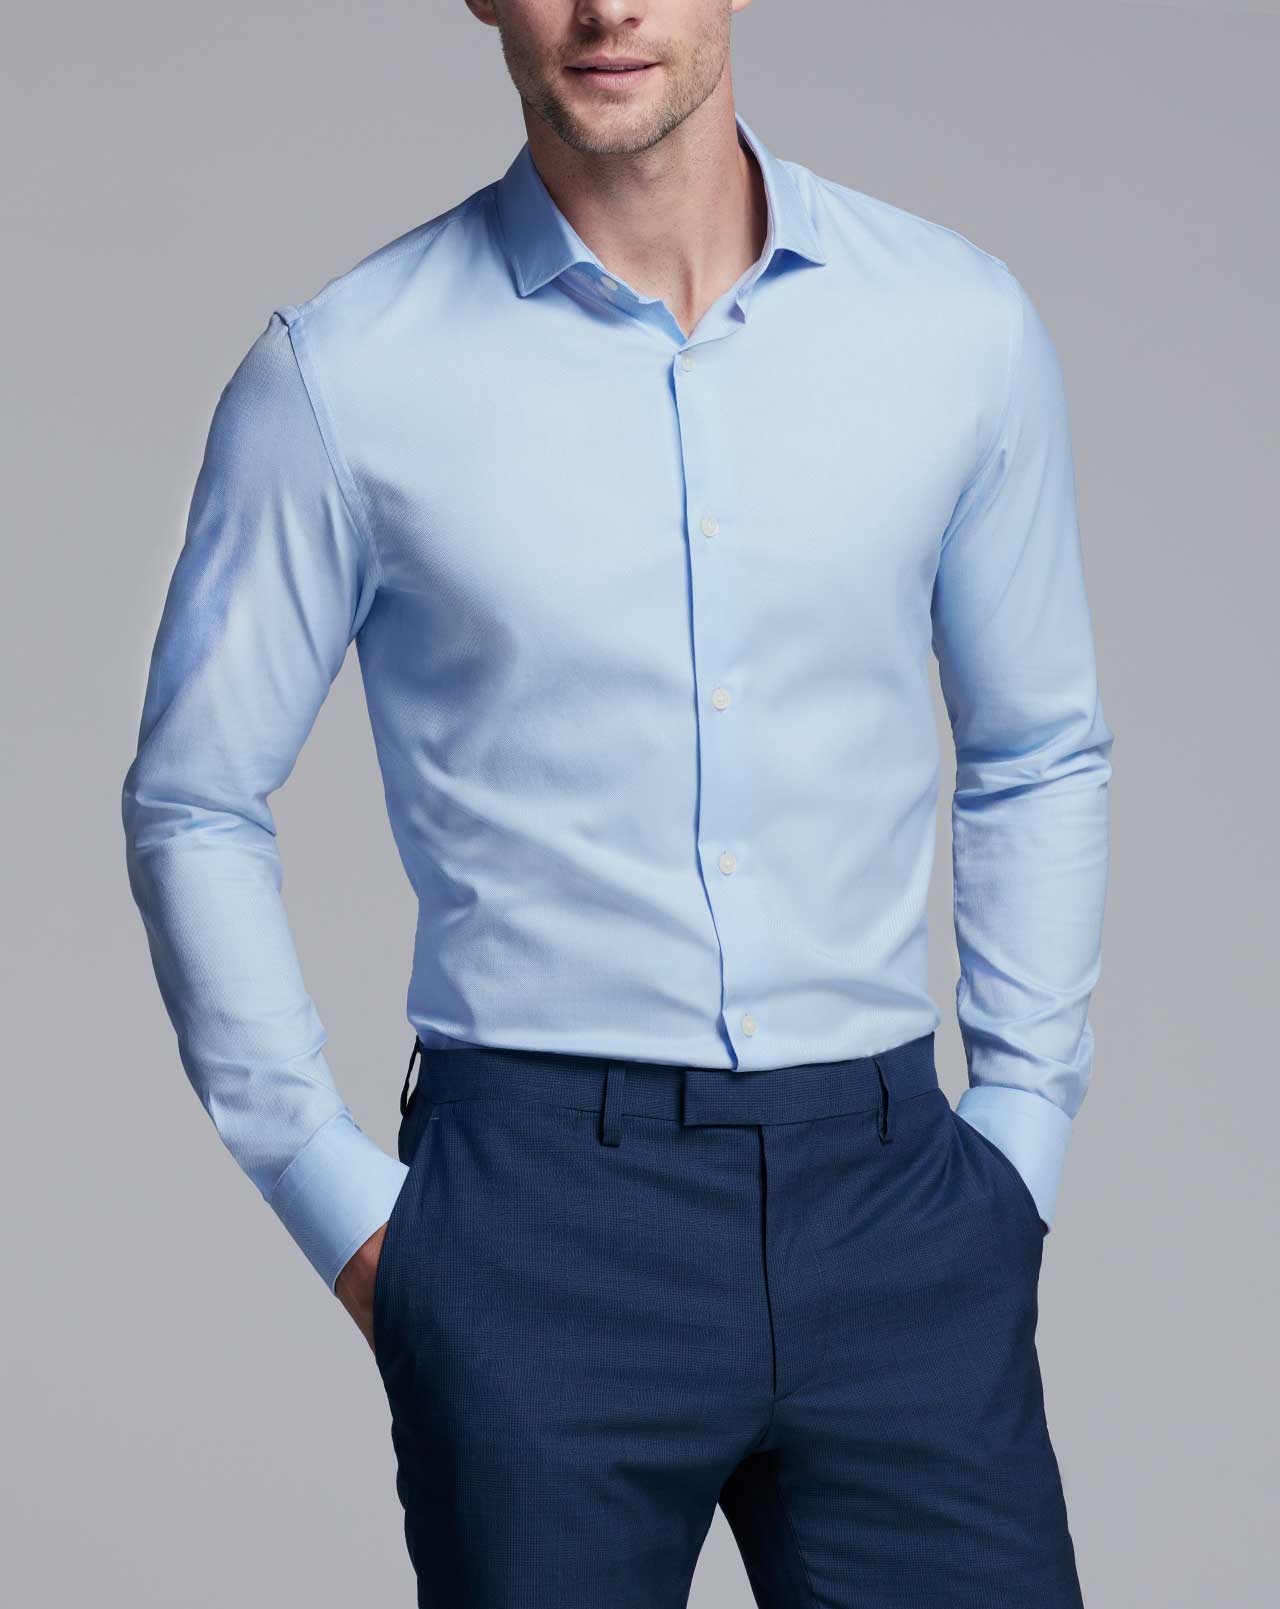 Fit Guide Men's Shirts - Grant